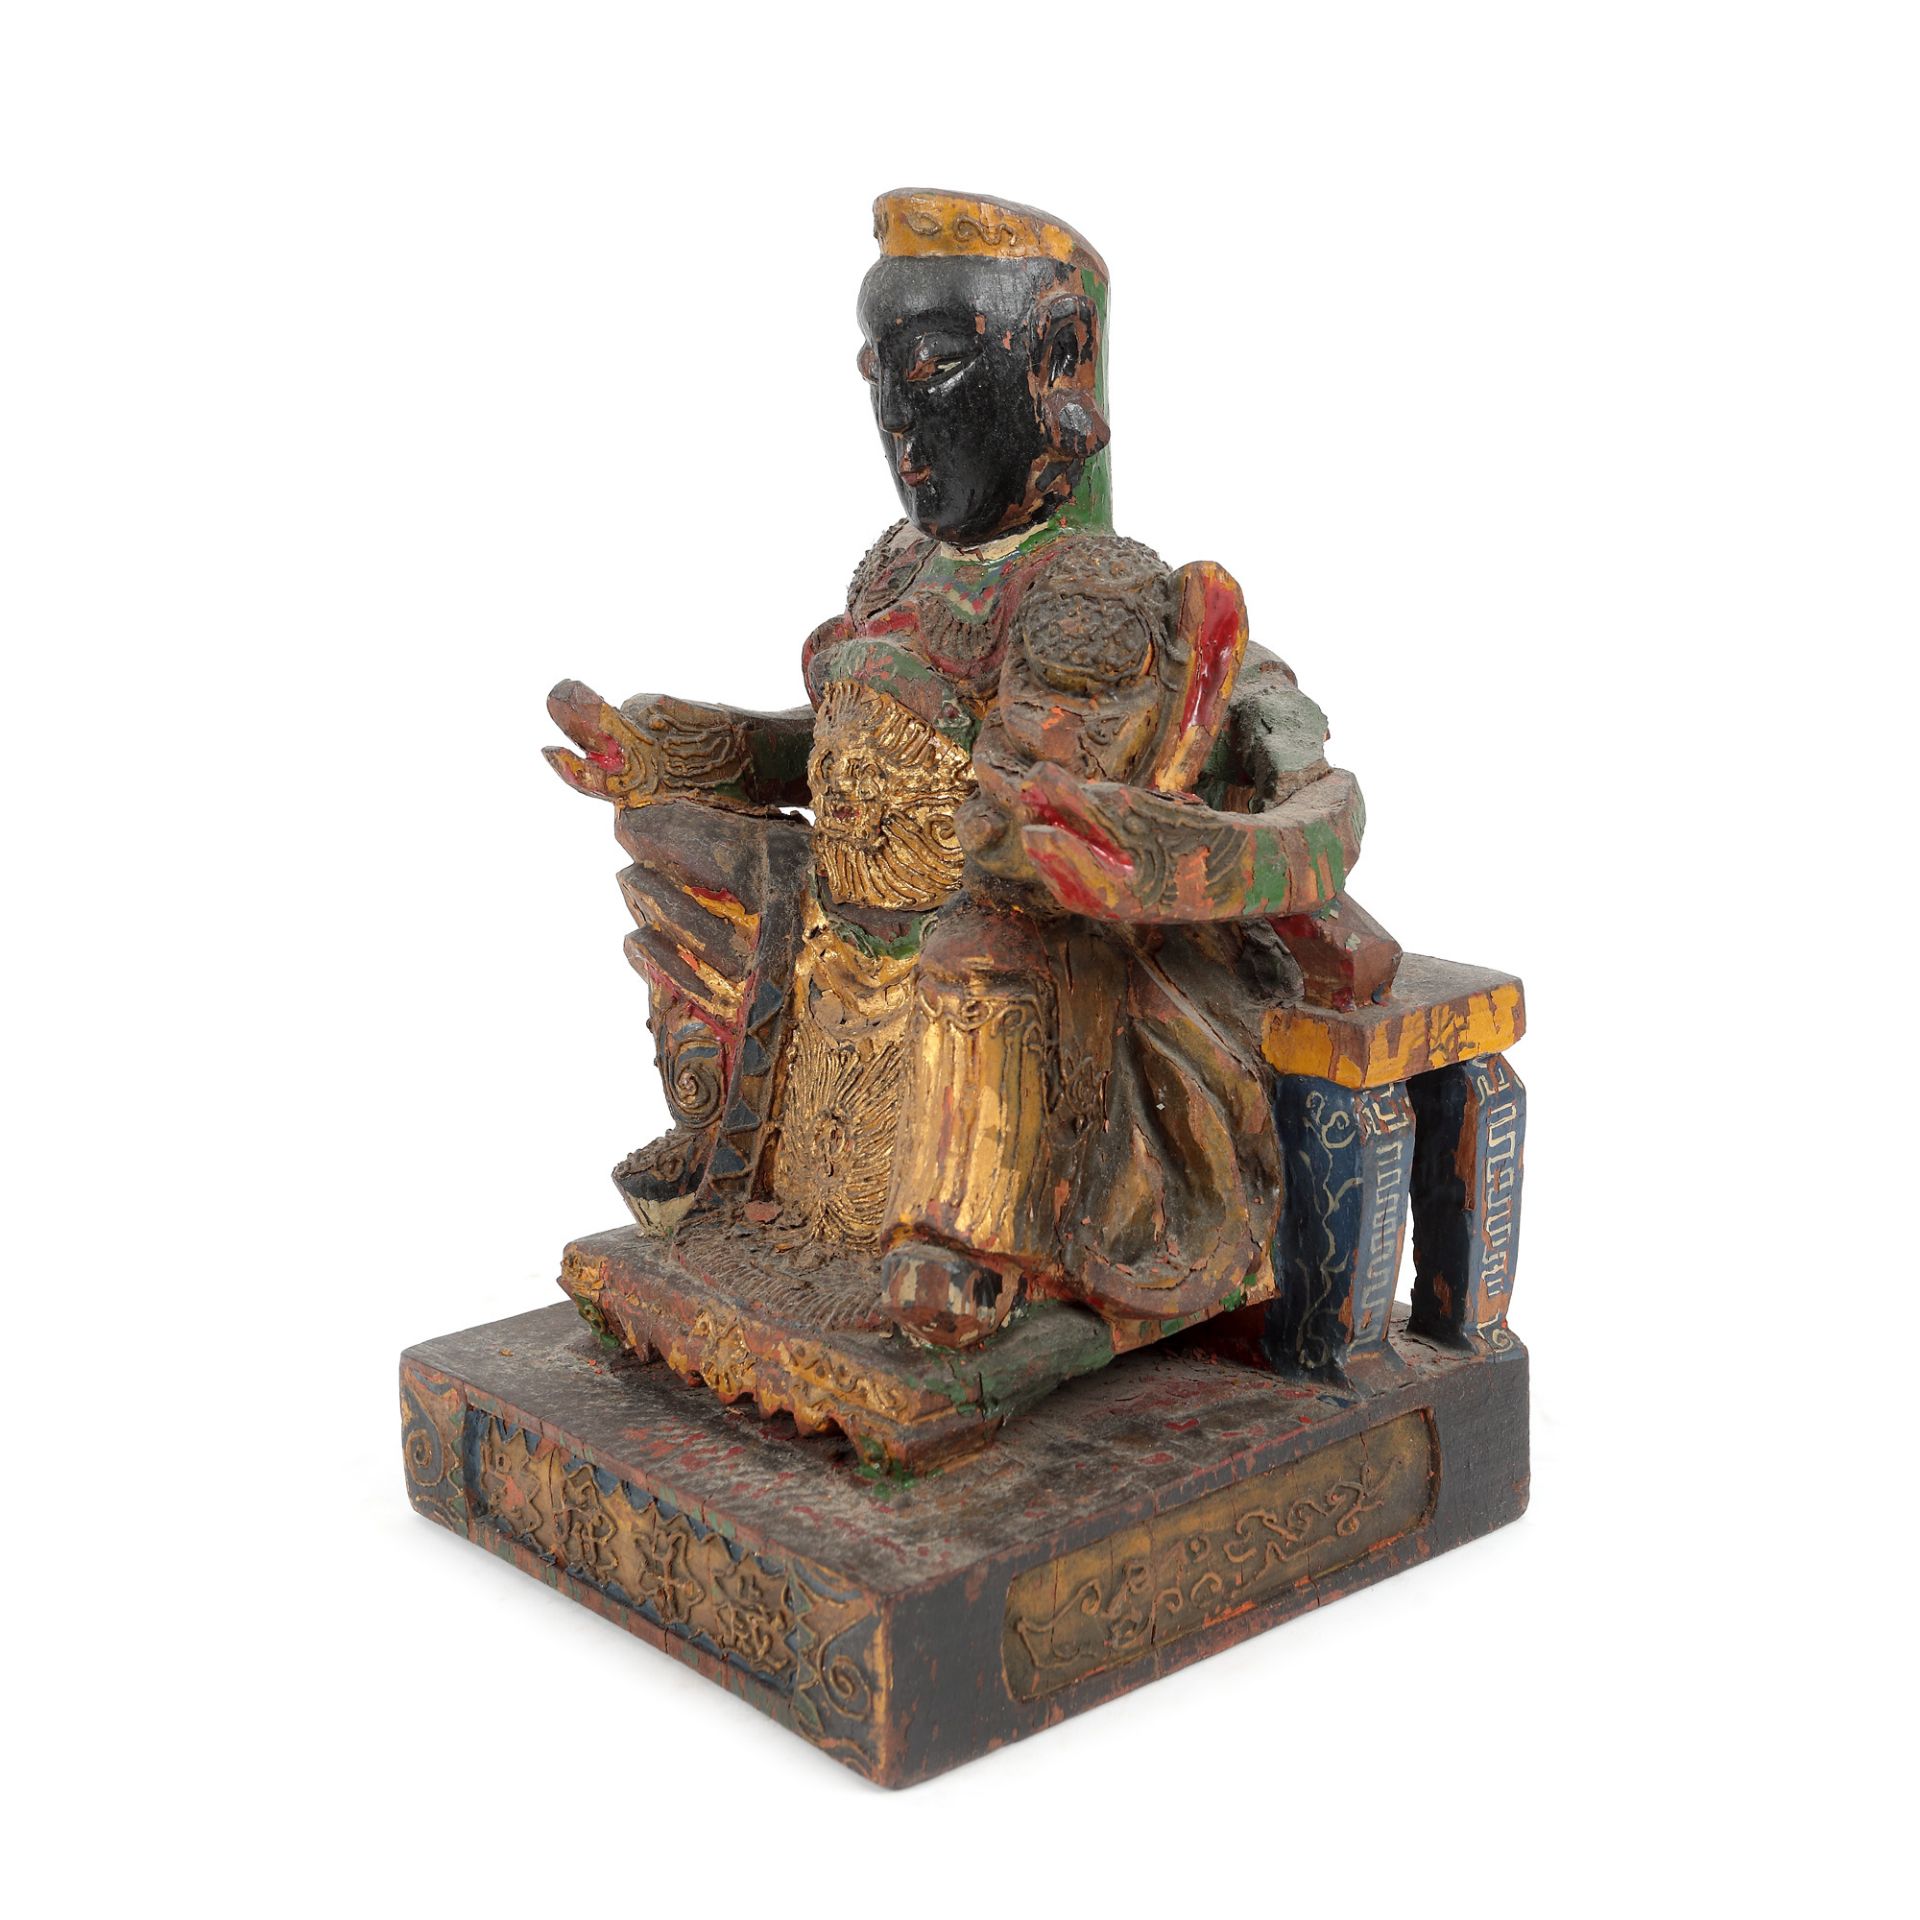 Statuette, painted wood, depicting a nobleman, Qing Dynasty, China, 19th century - Image 3 of 4